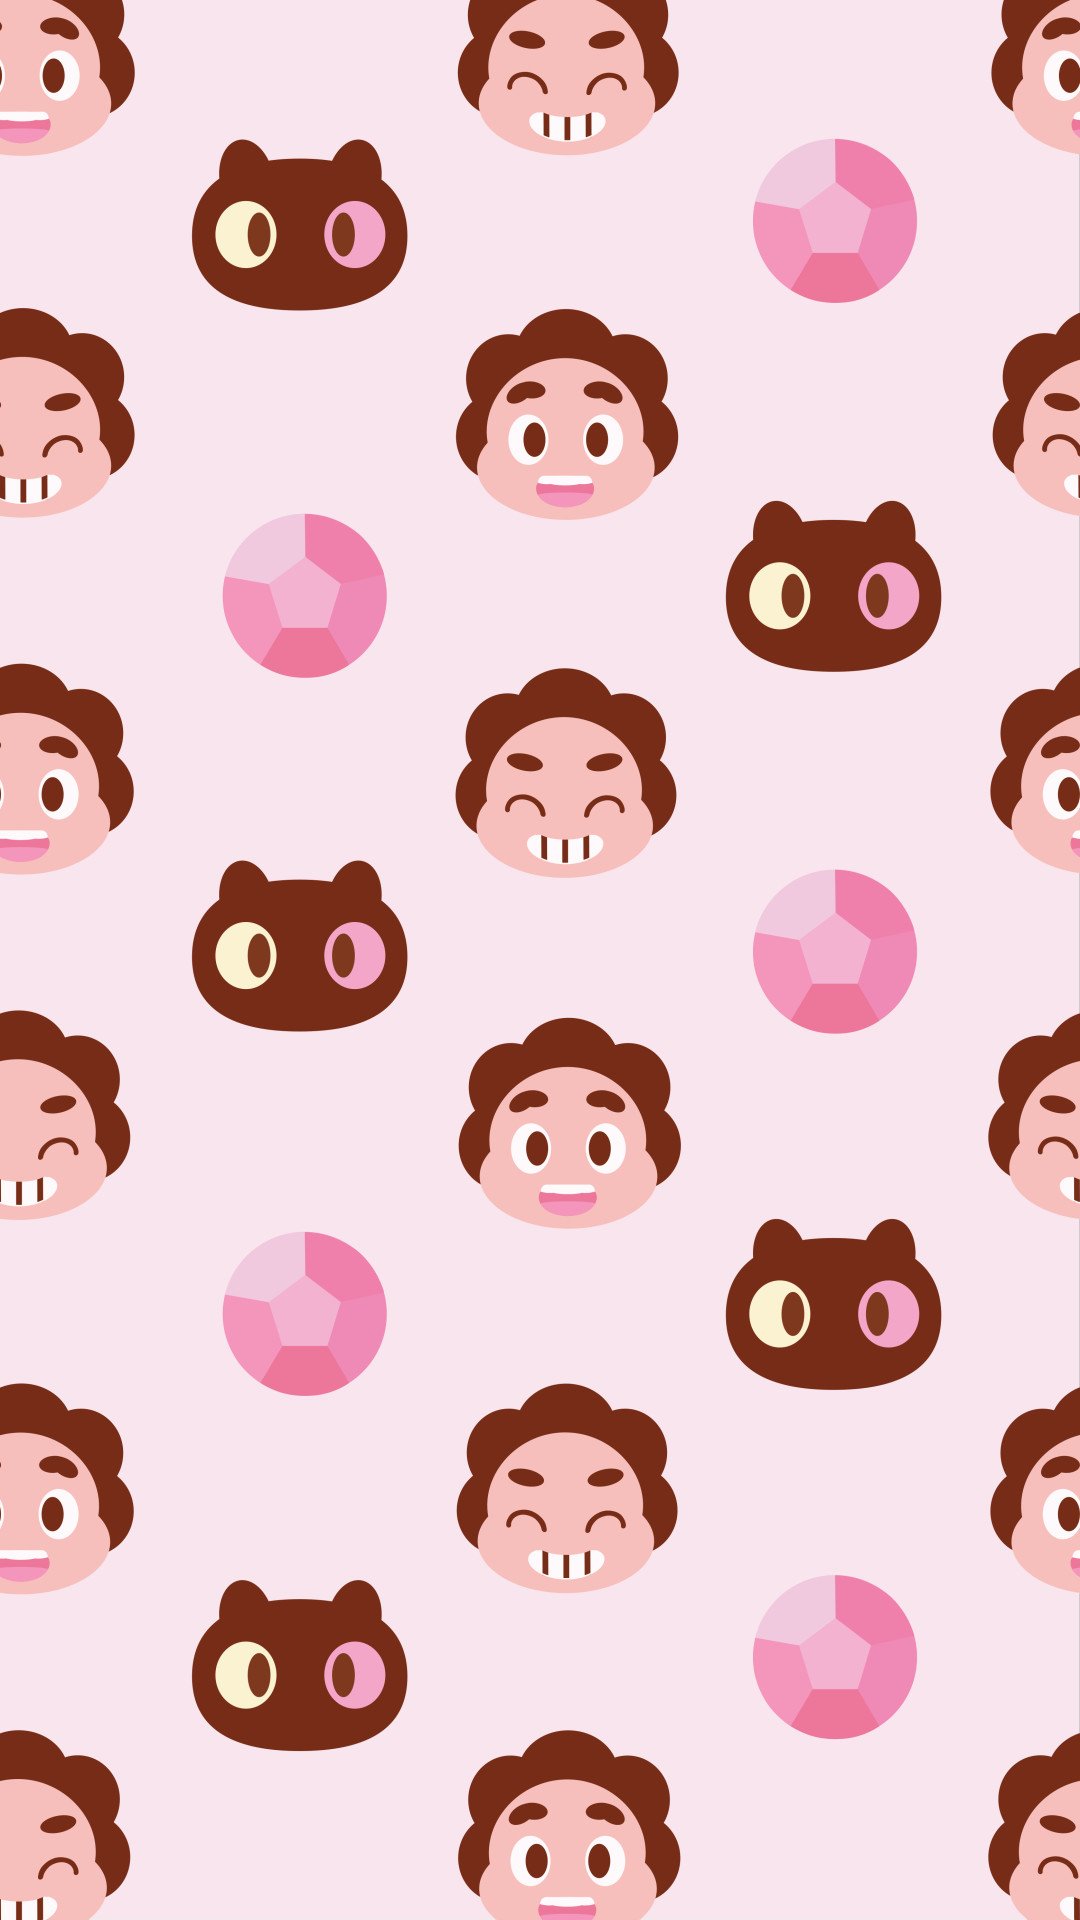 Strawberry boy, steven wallpapers for your phone you can get both